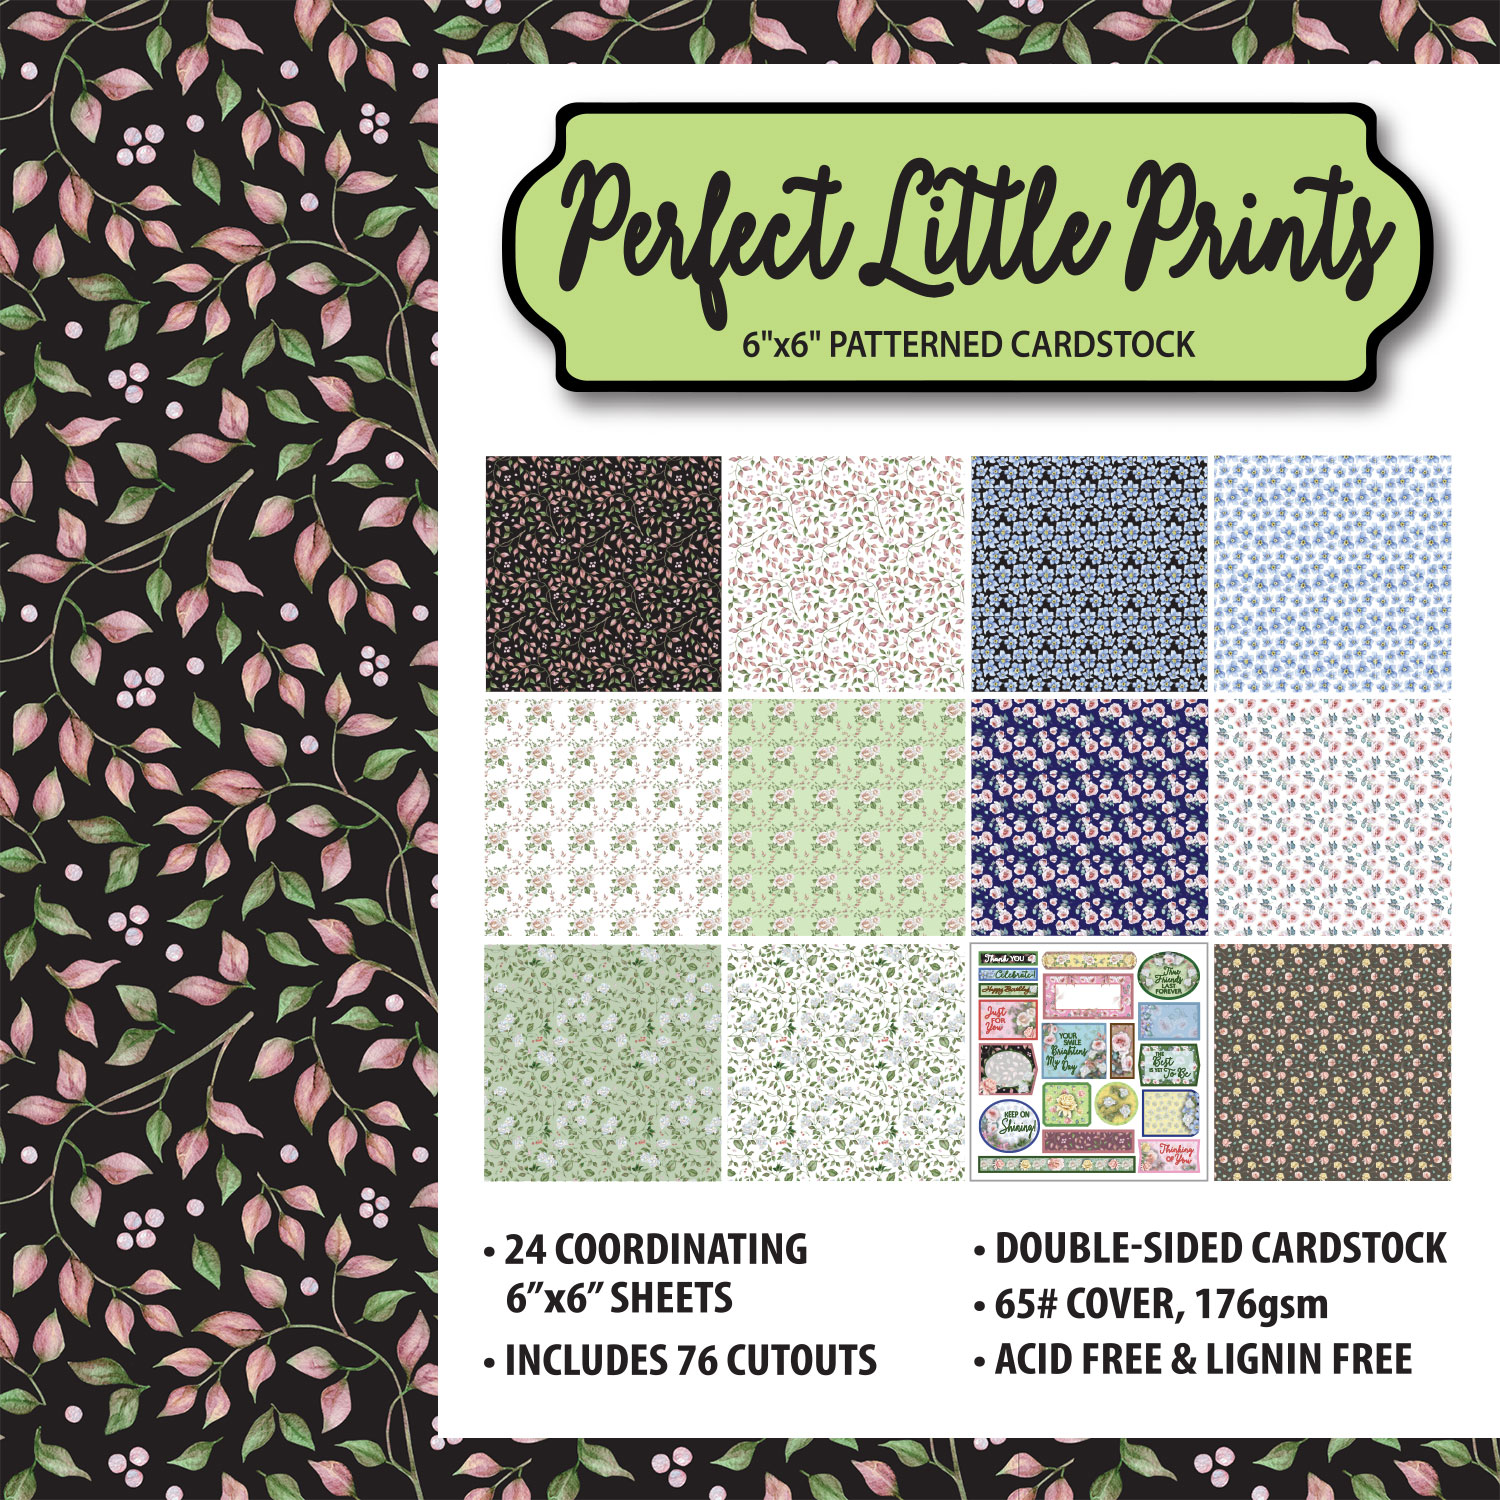 Perfect Little Prints 6x6 Patterned Cardstock